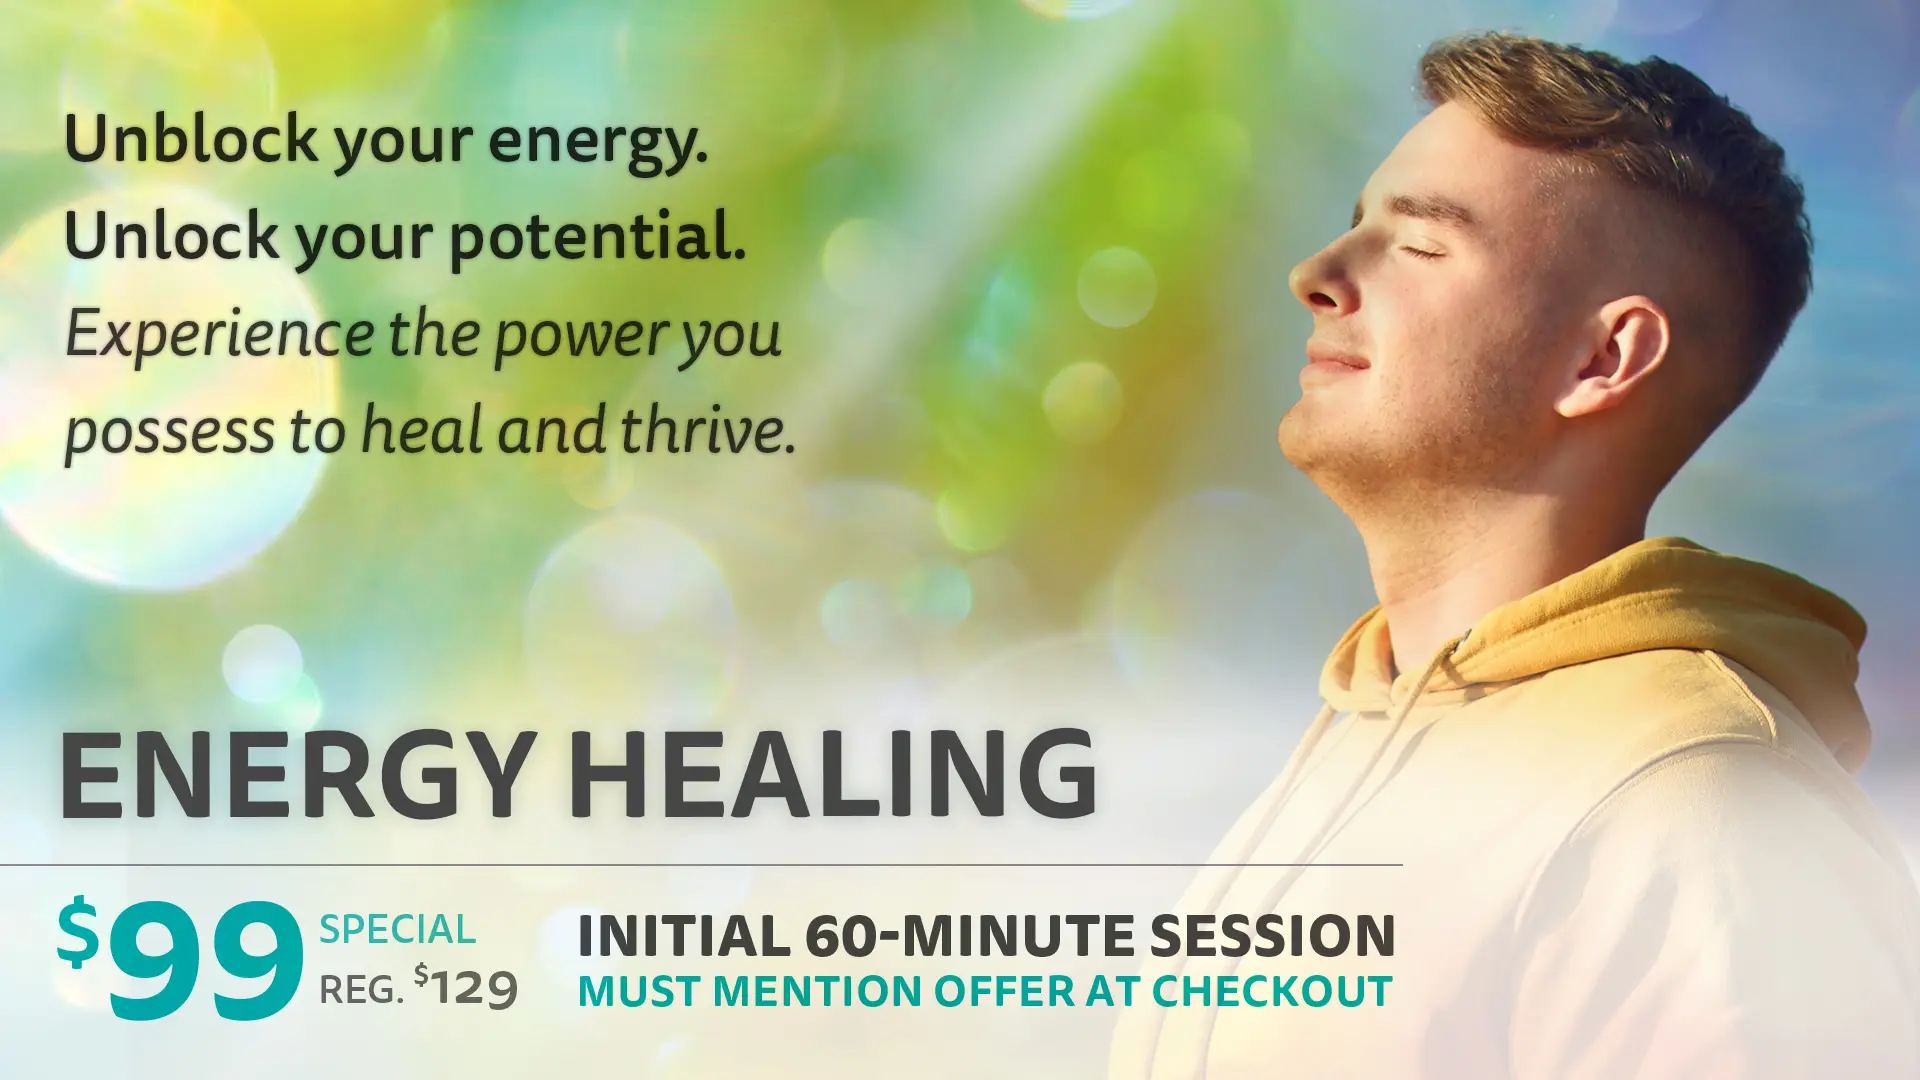 Energy Healing Special Offer at Thrive Proactive Health